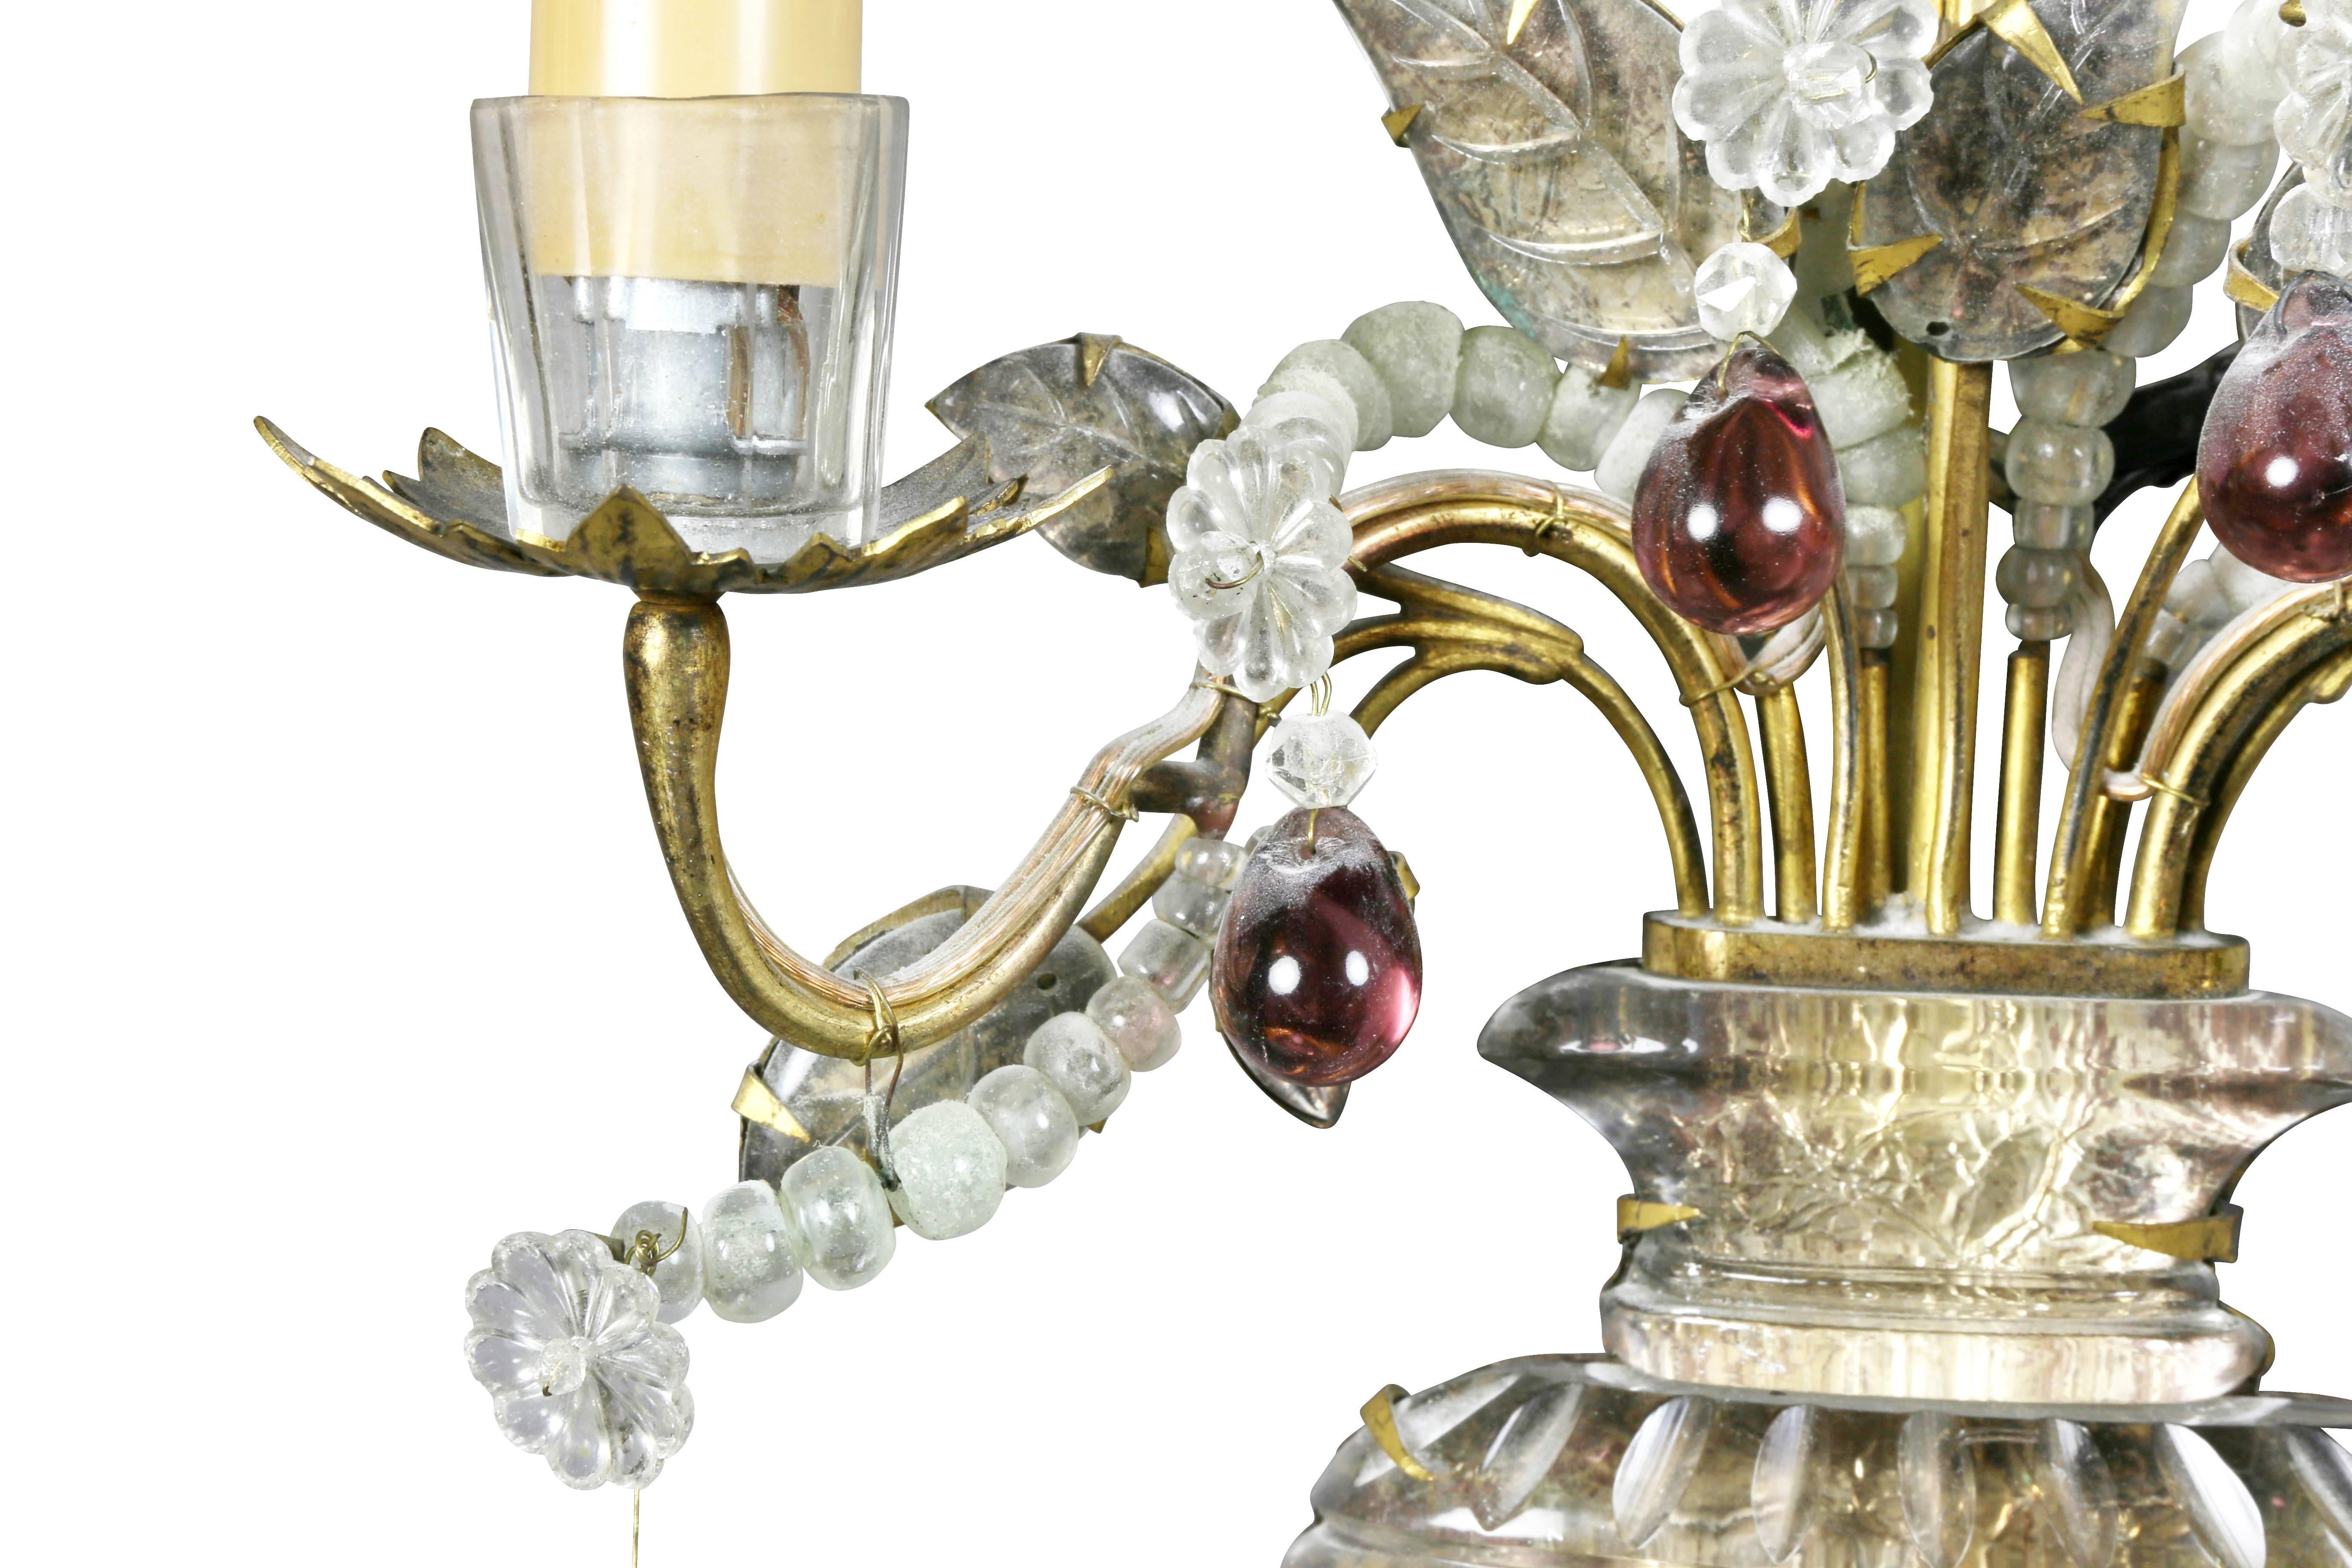 Early 20th Century Pair of Rock Crystal and Amethyst Sconces Signed Baguès, Paris